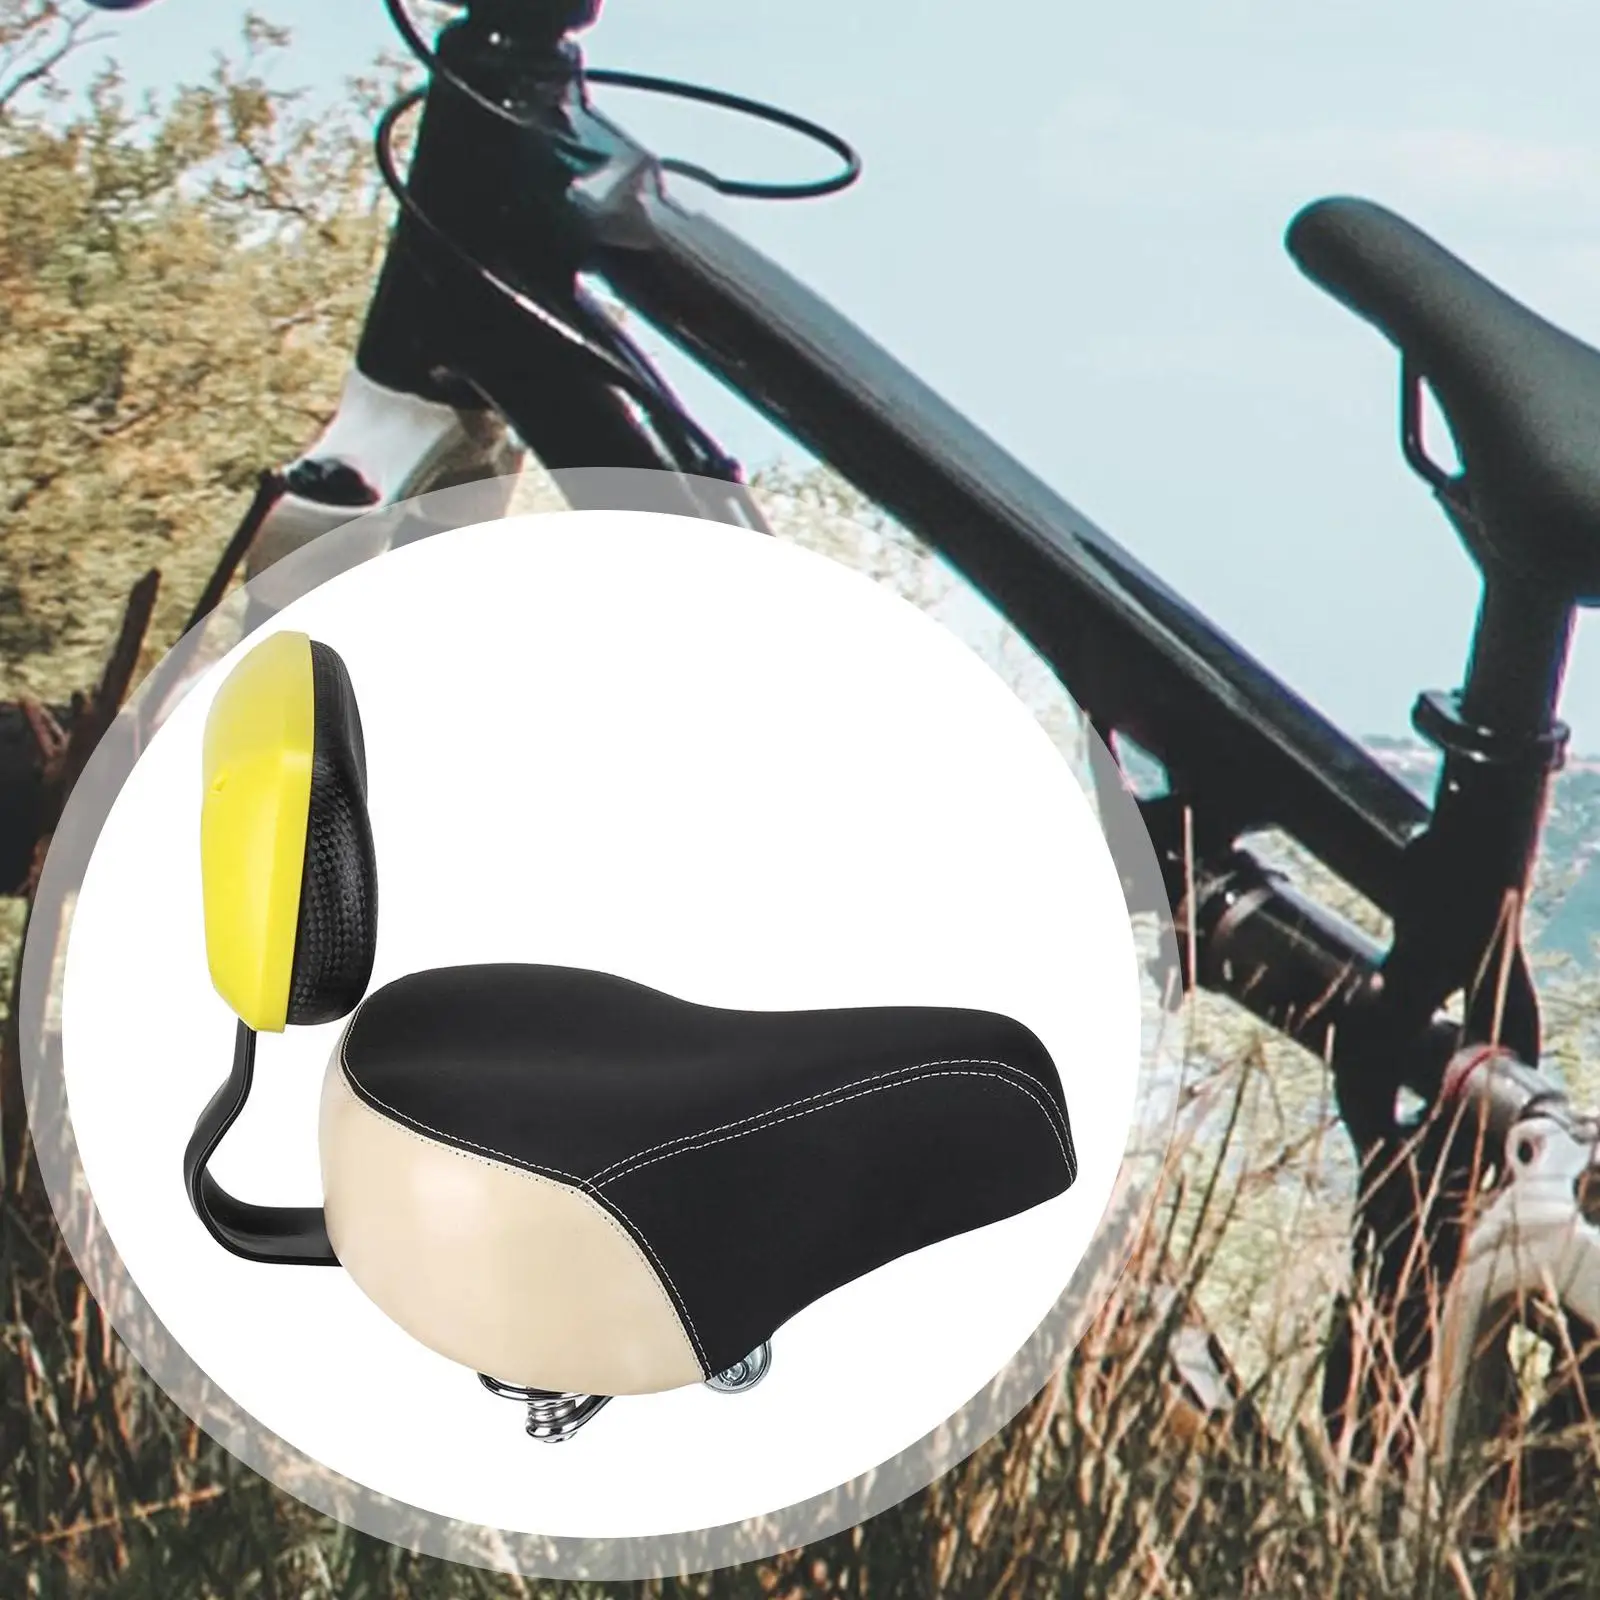 Bicycle Seat Saddle with Backrest Pad Case Padding for Cycling Bike Women